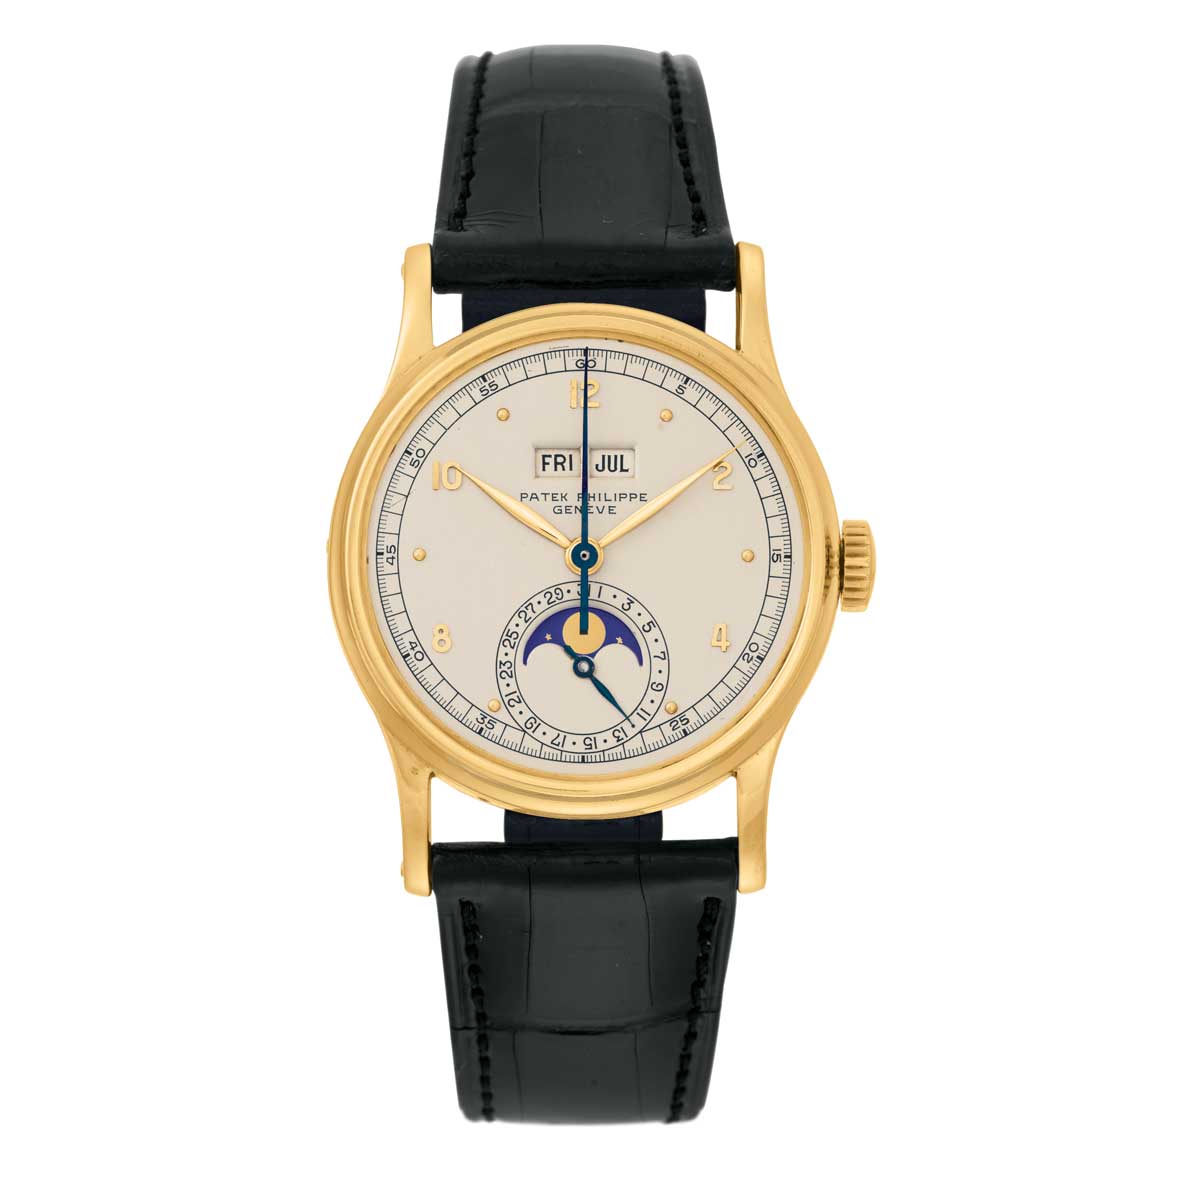 1941: Patek Philippe’s first series-produced perpetual calendar wristwatch, the Ref. 1526, also established the company’s signature dial layout of two apertures and a central subdial. This model was 34mm and fitted with the hand-wound caliber 12-120 Q